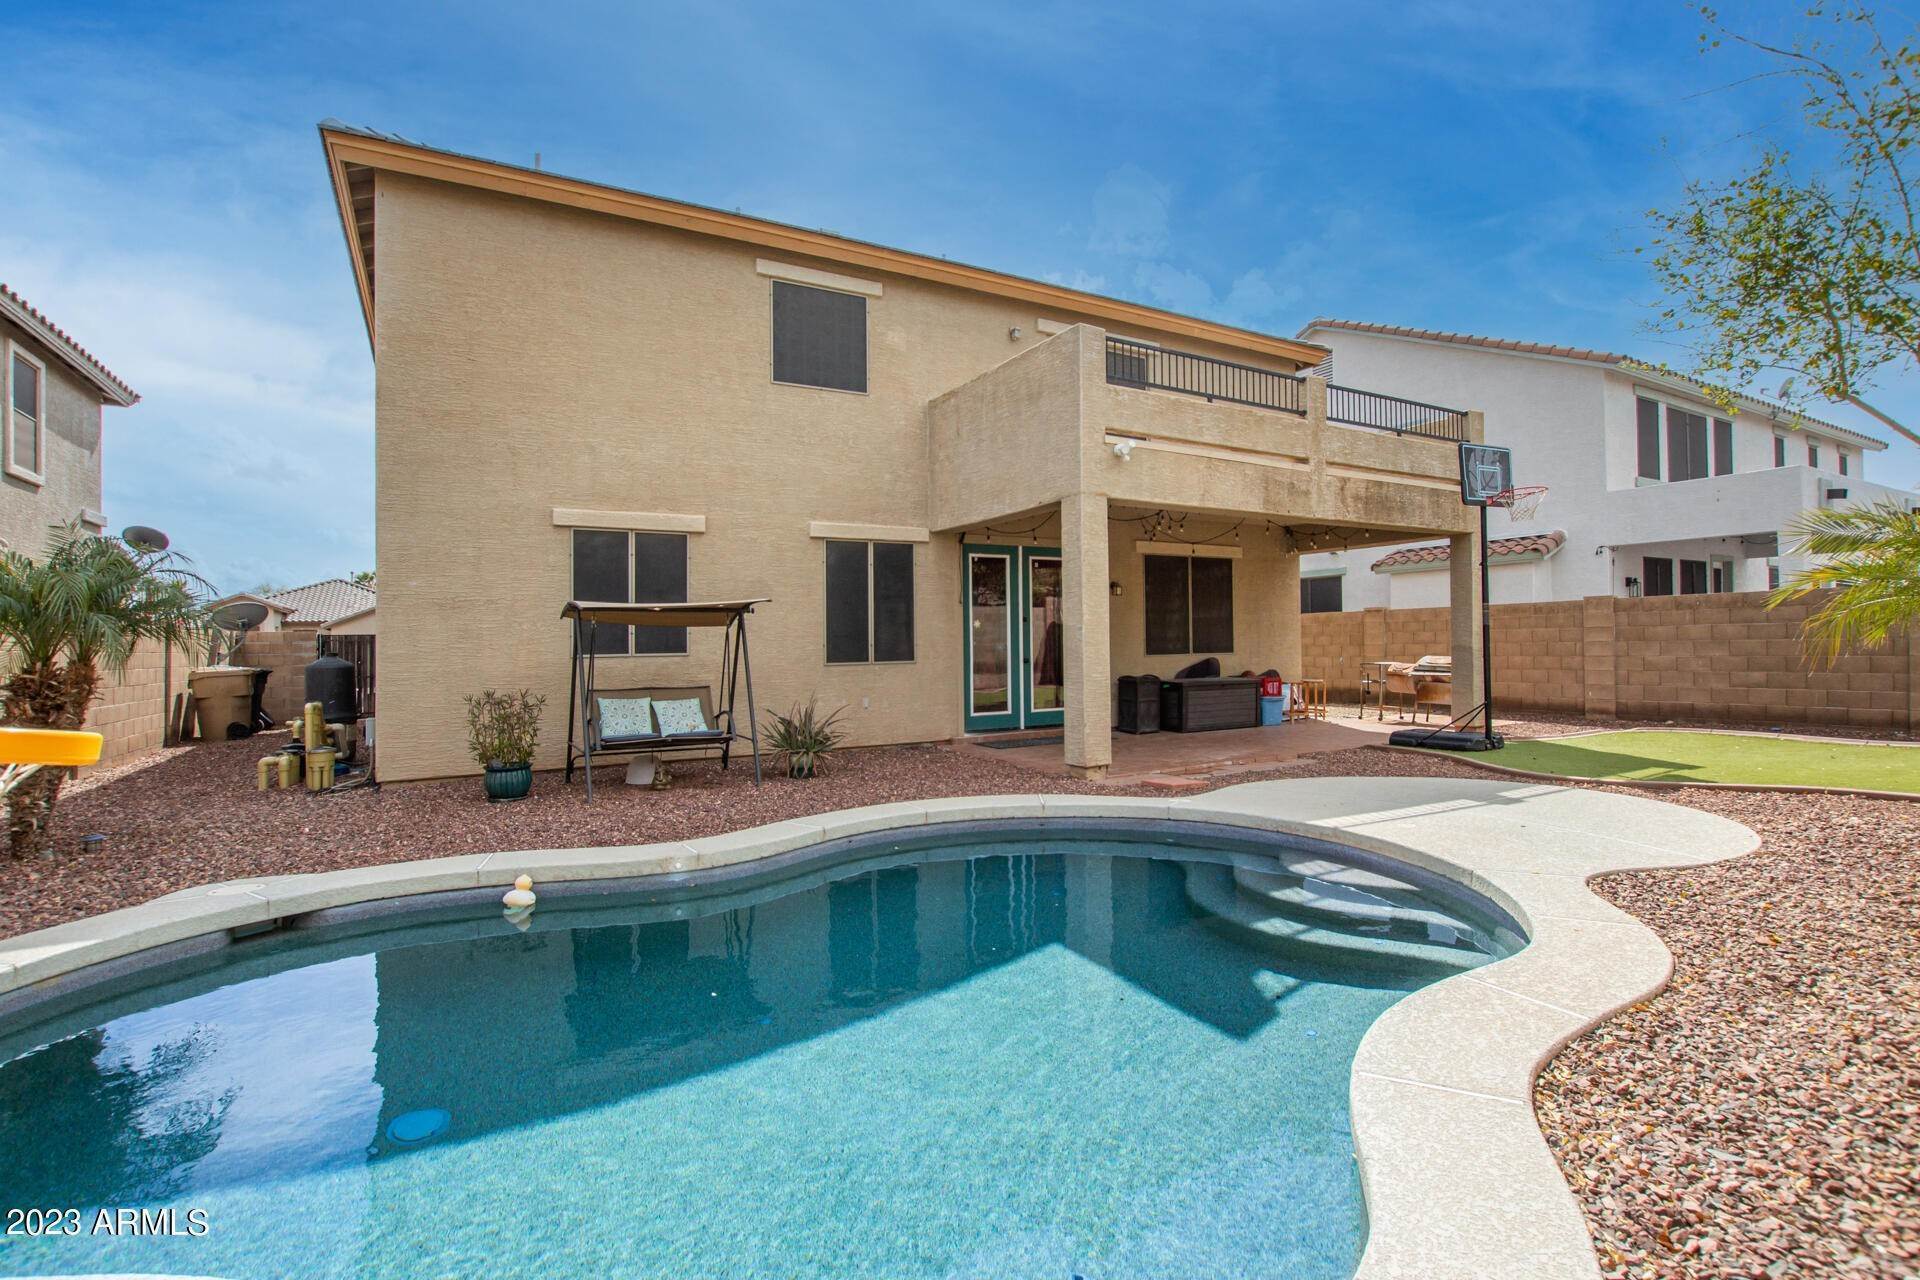 3. Single Family for Sale at Goodyear, AZ 85338